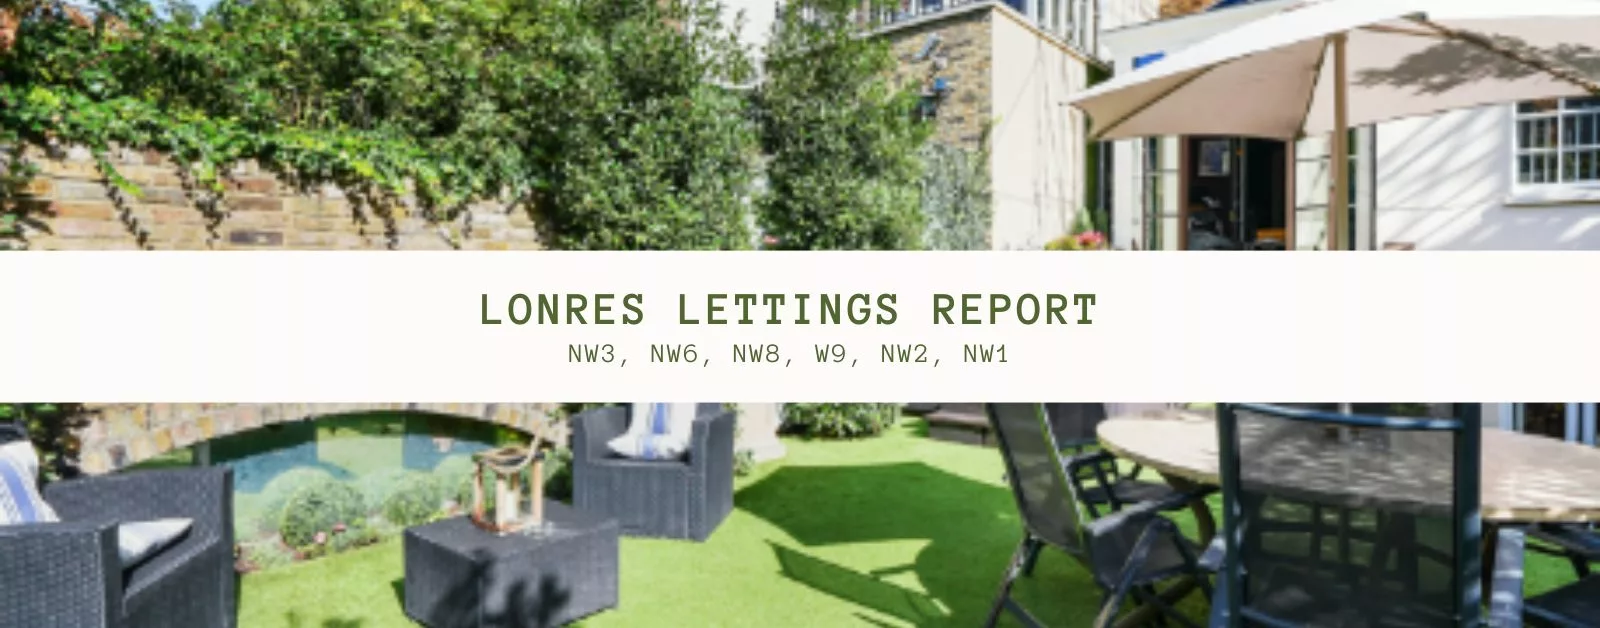 LonRes Lettings Report for Hampstead. November 2023-January 2024